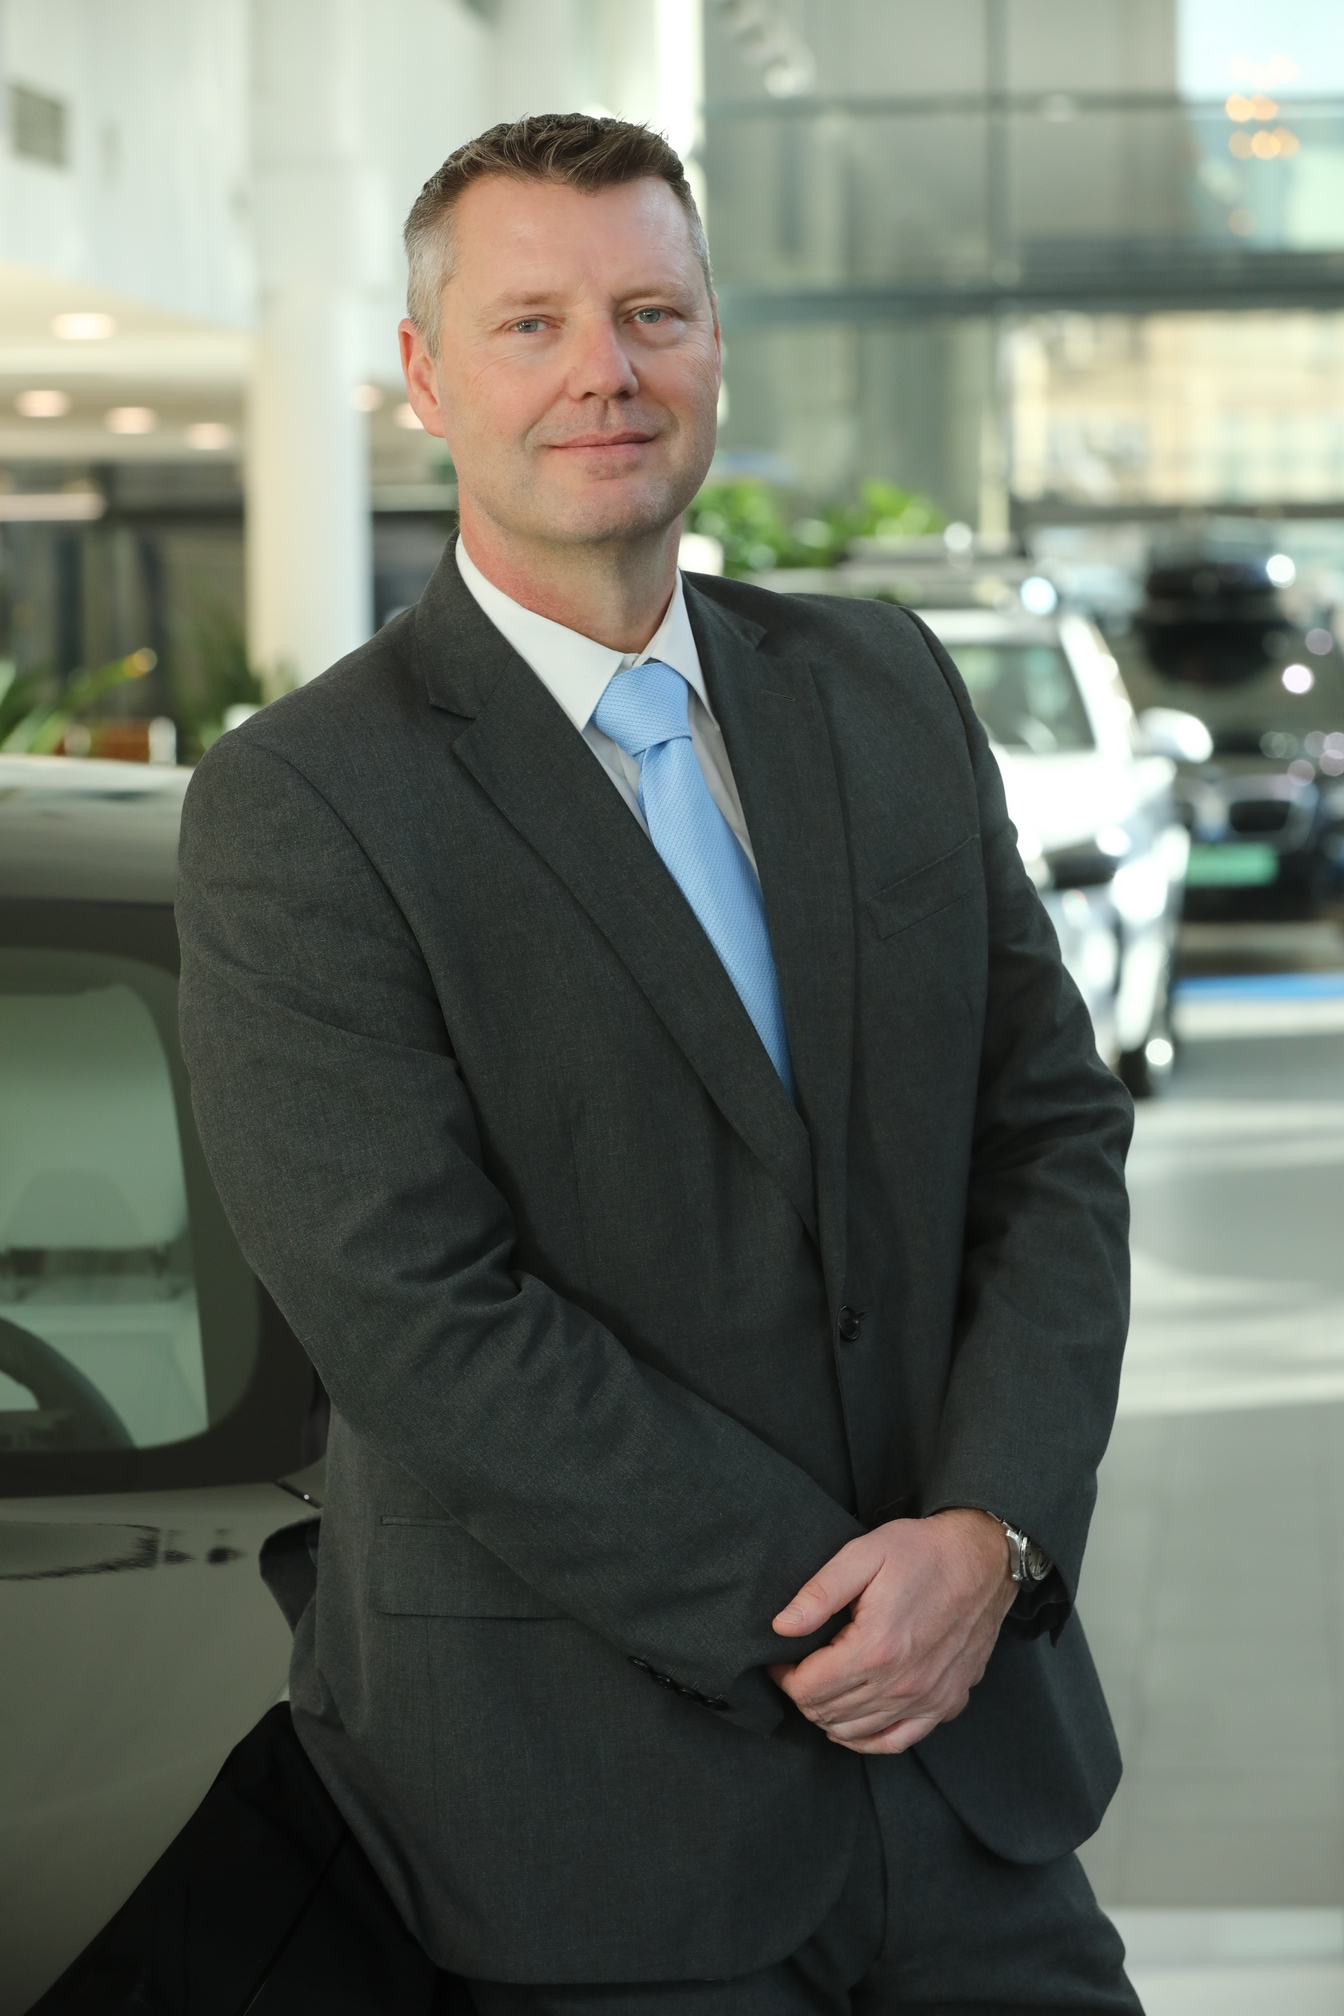 Interview 3: Andrew Prest, Member of the Board at AutoWallis Group